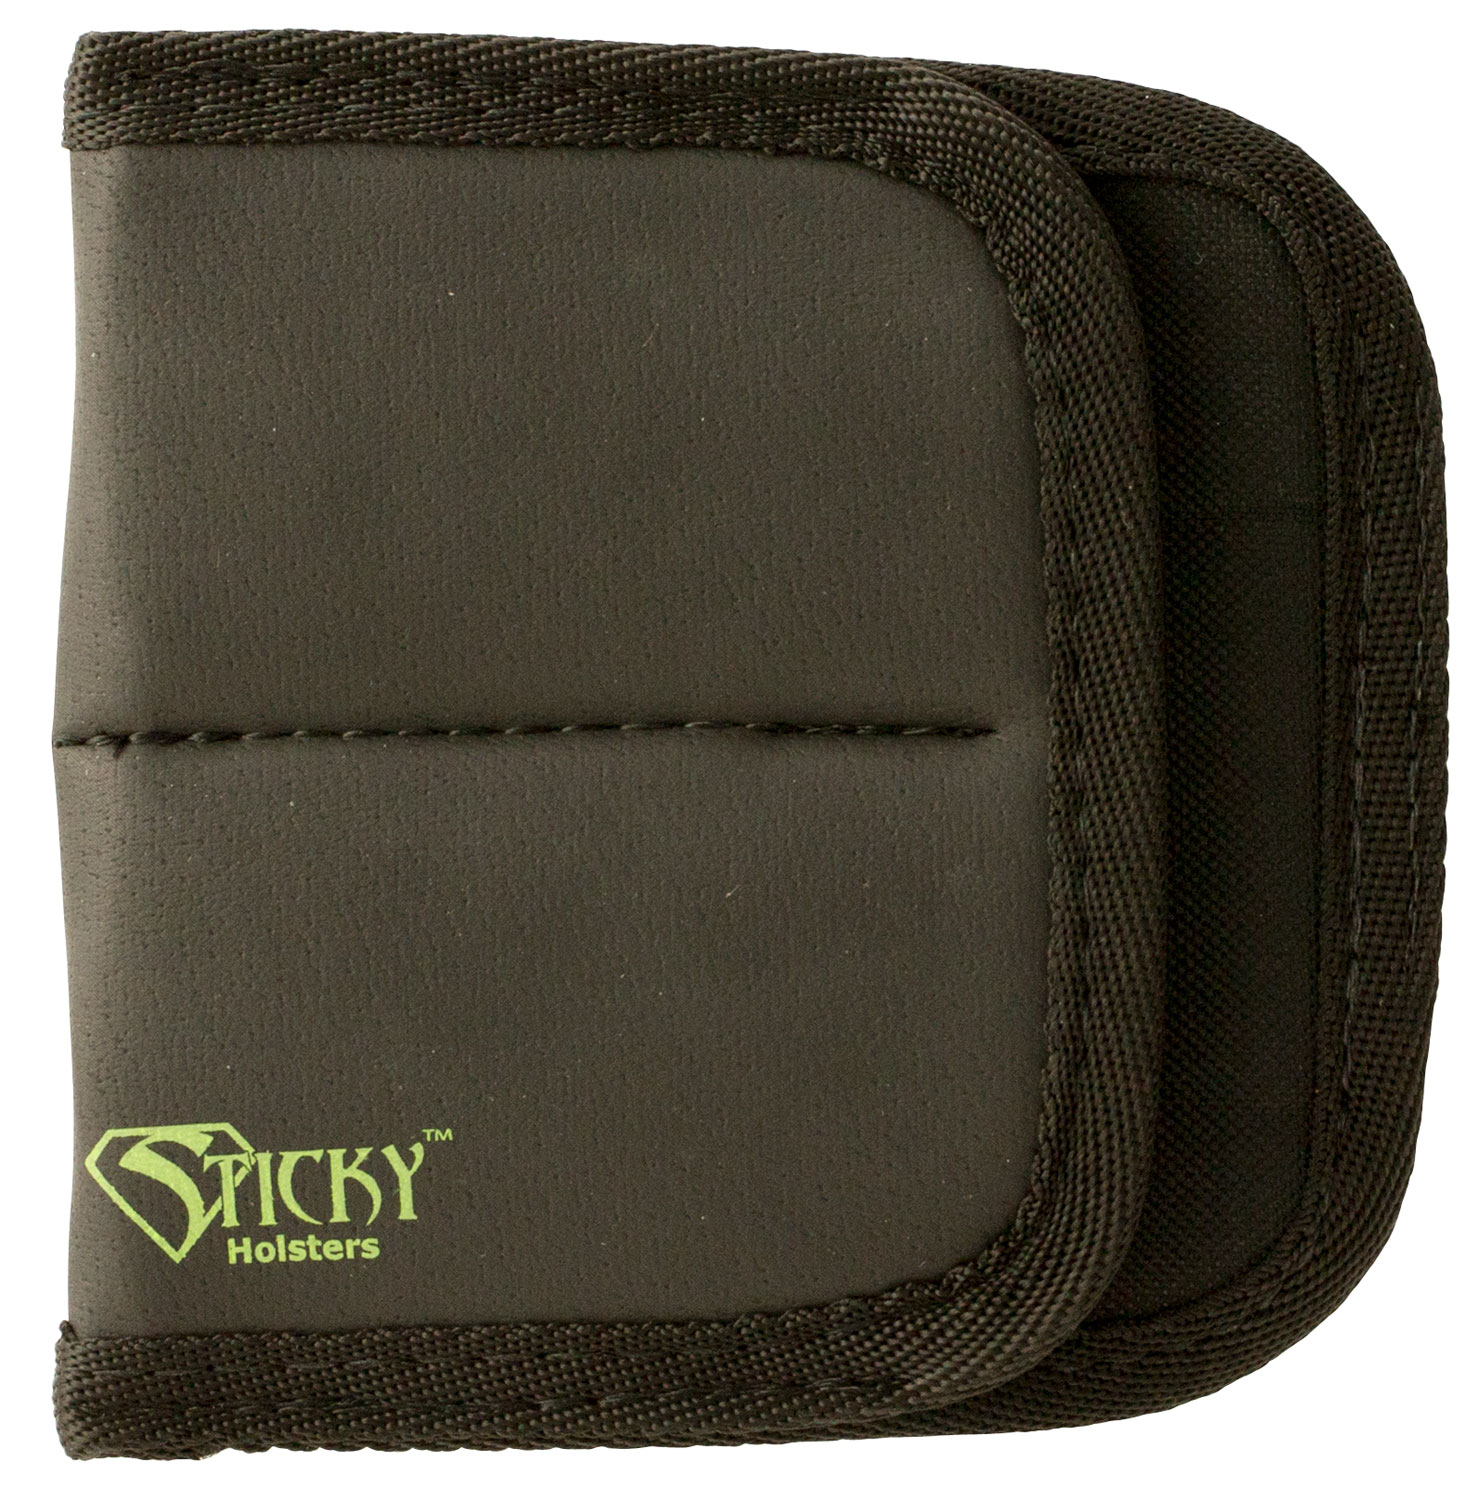 Sticky Holsters DSMP Dual Mag Pouch Latex Free Synthetic Rubber Black w/Green Logo